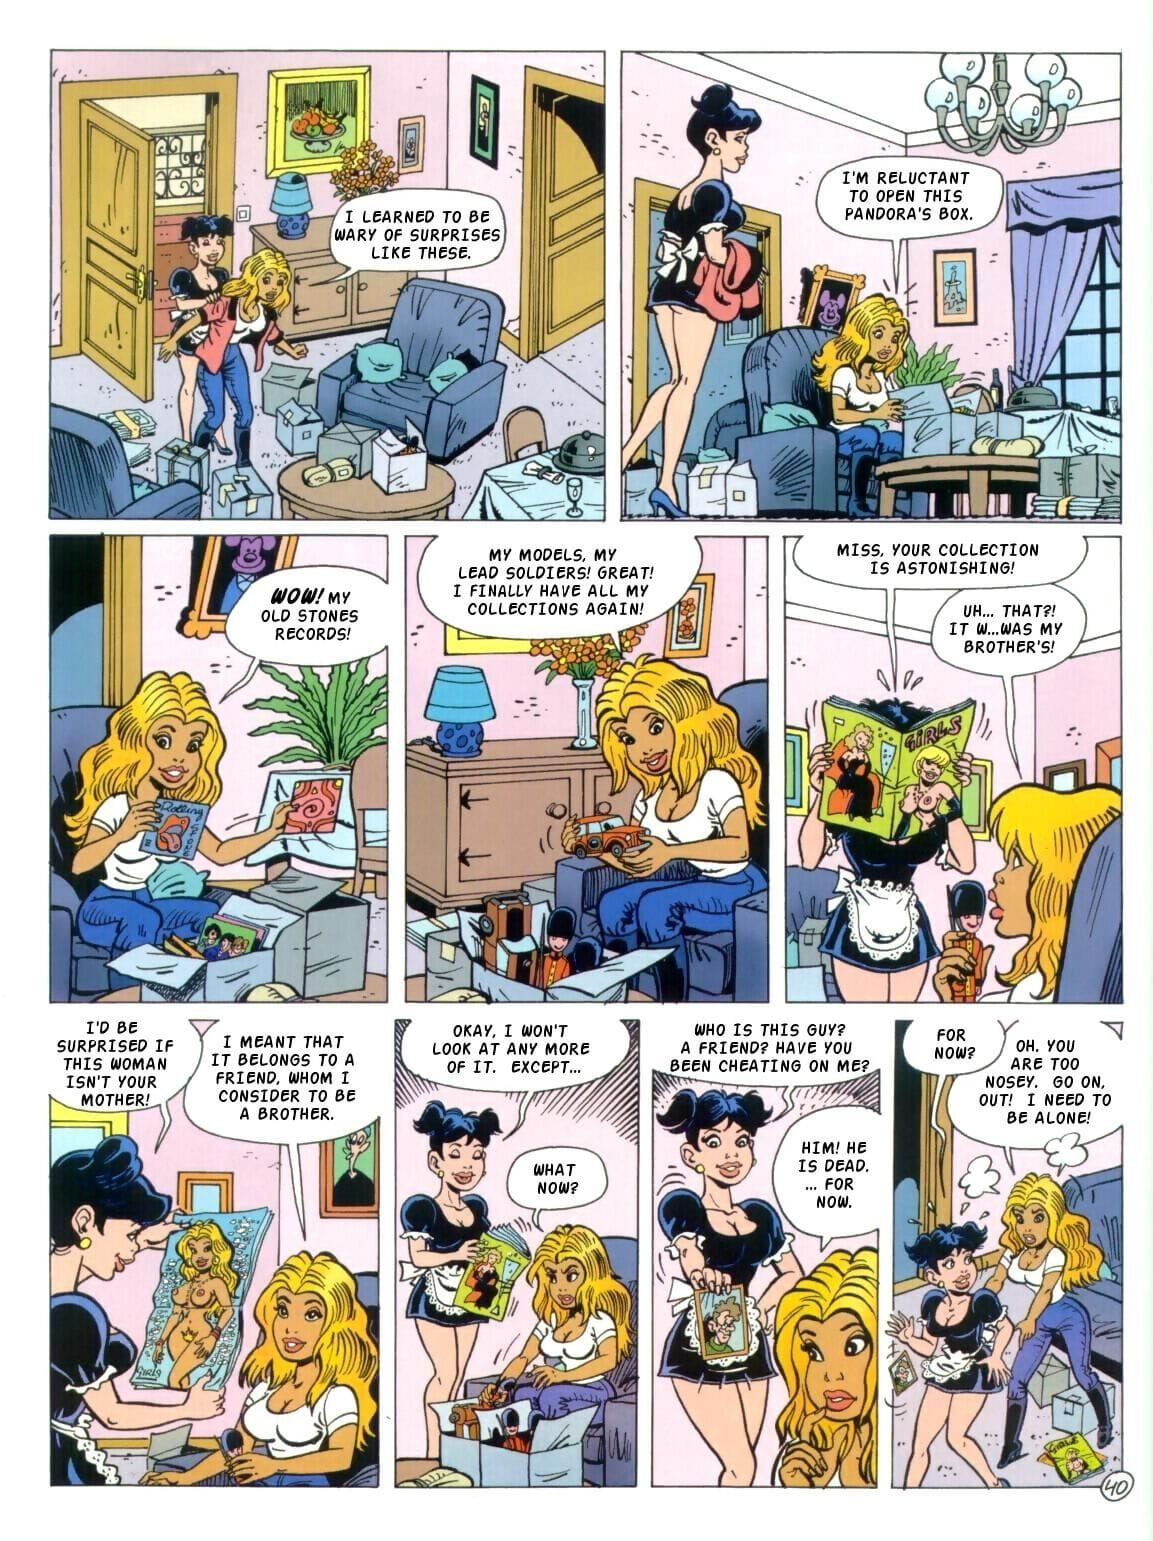 A Real Woman #2 - part 2 page 1